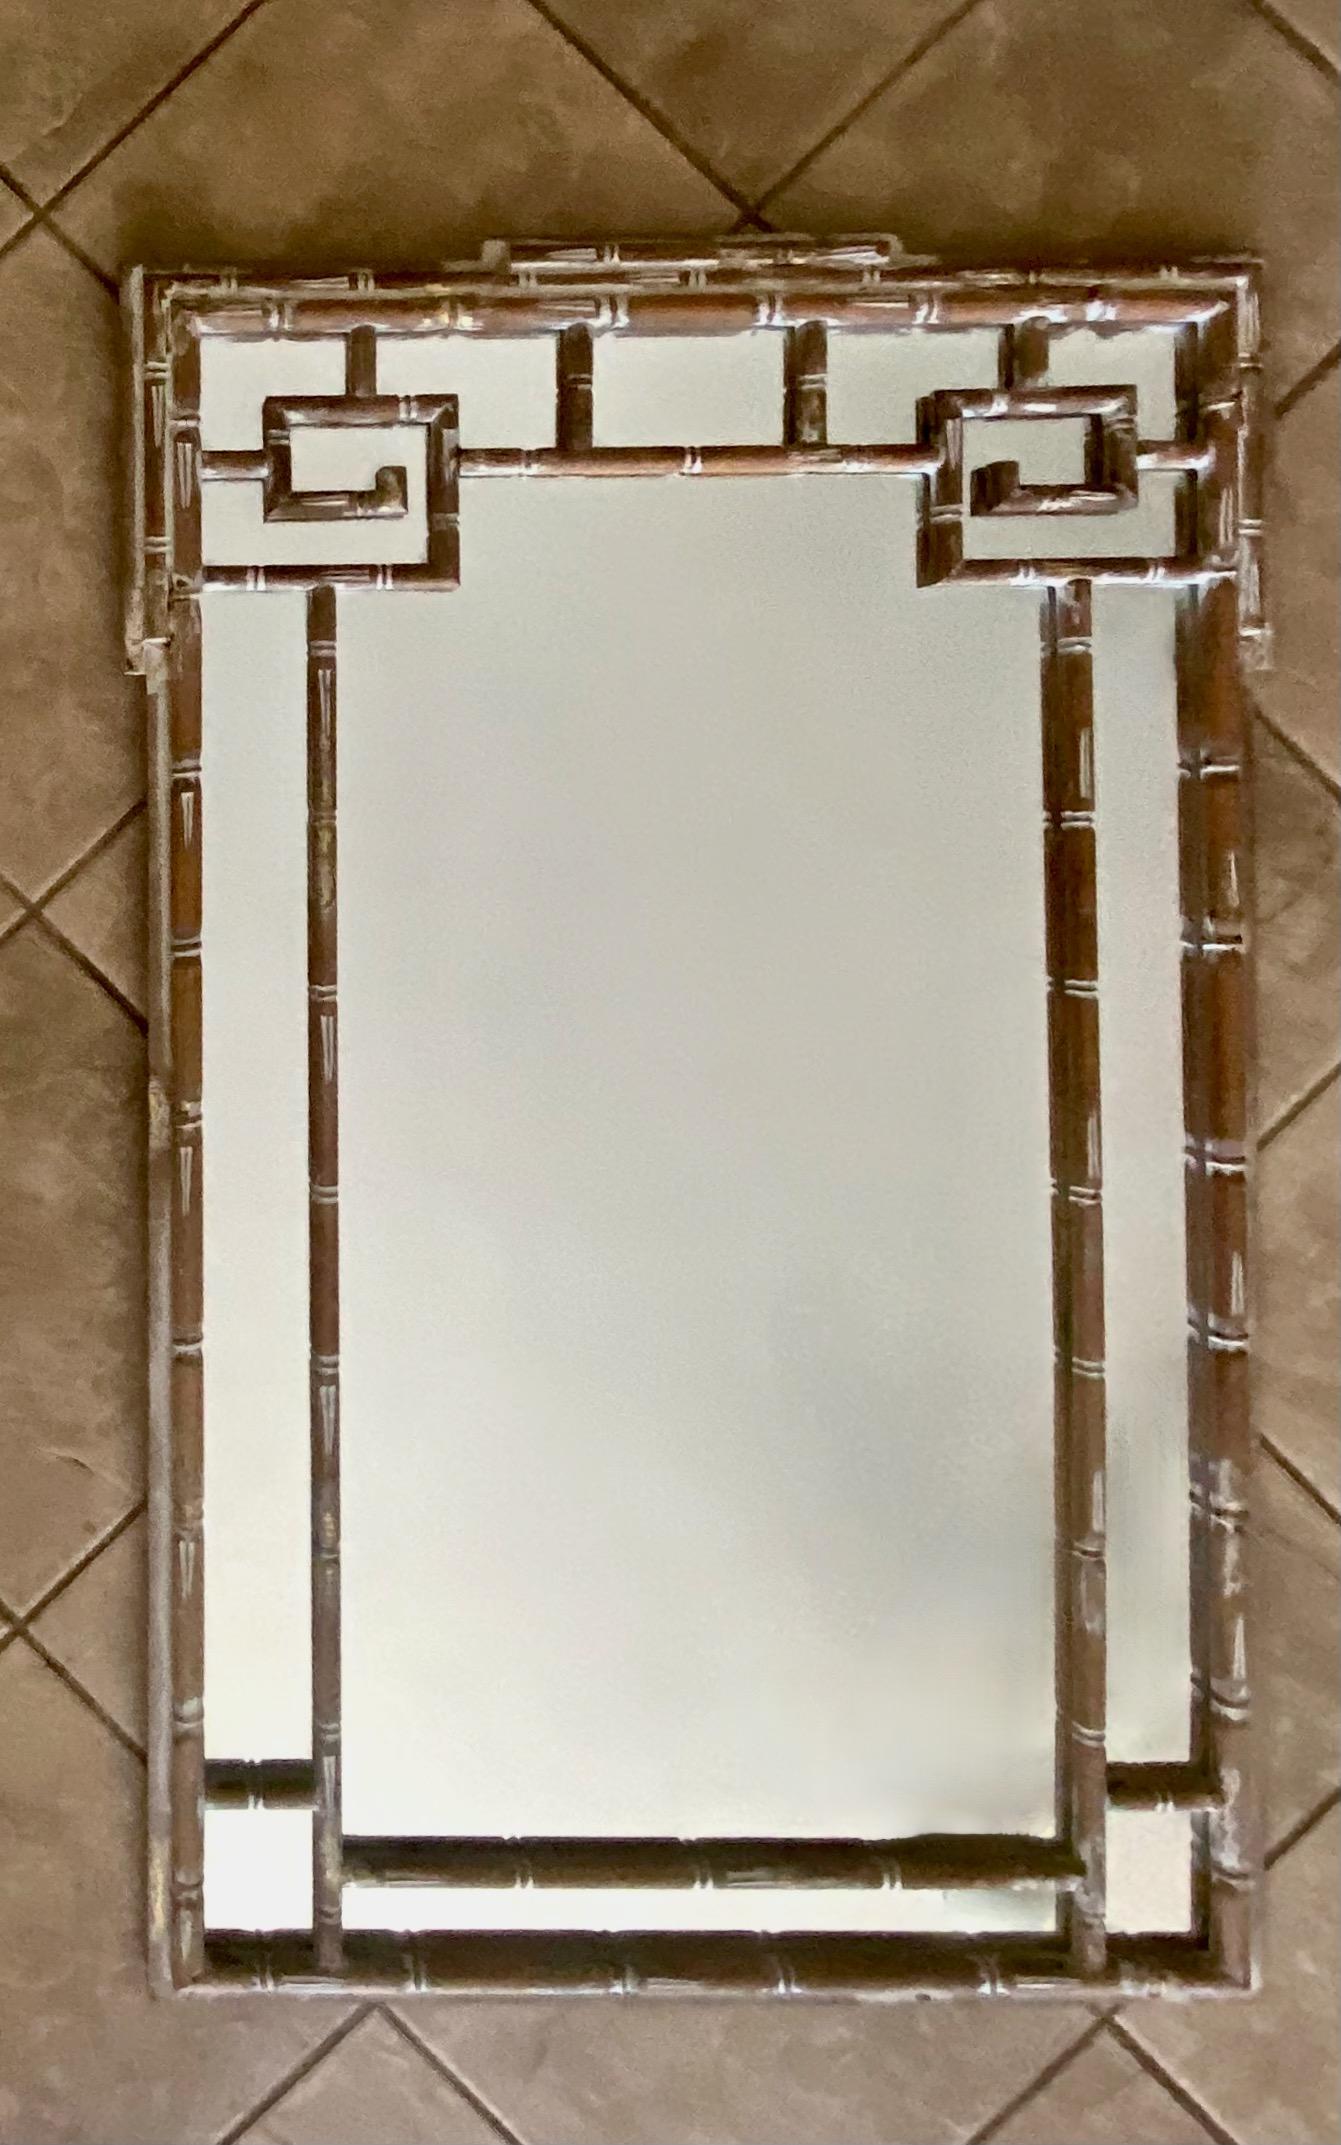 Italian carved wood faux bamboo and Greek key motif wall mirror. Frame is finished in an antiqued scraped white finish with small patches of gold leaf (see close ups for detailing).